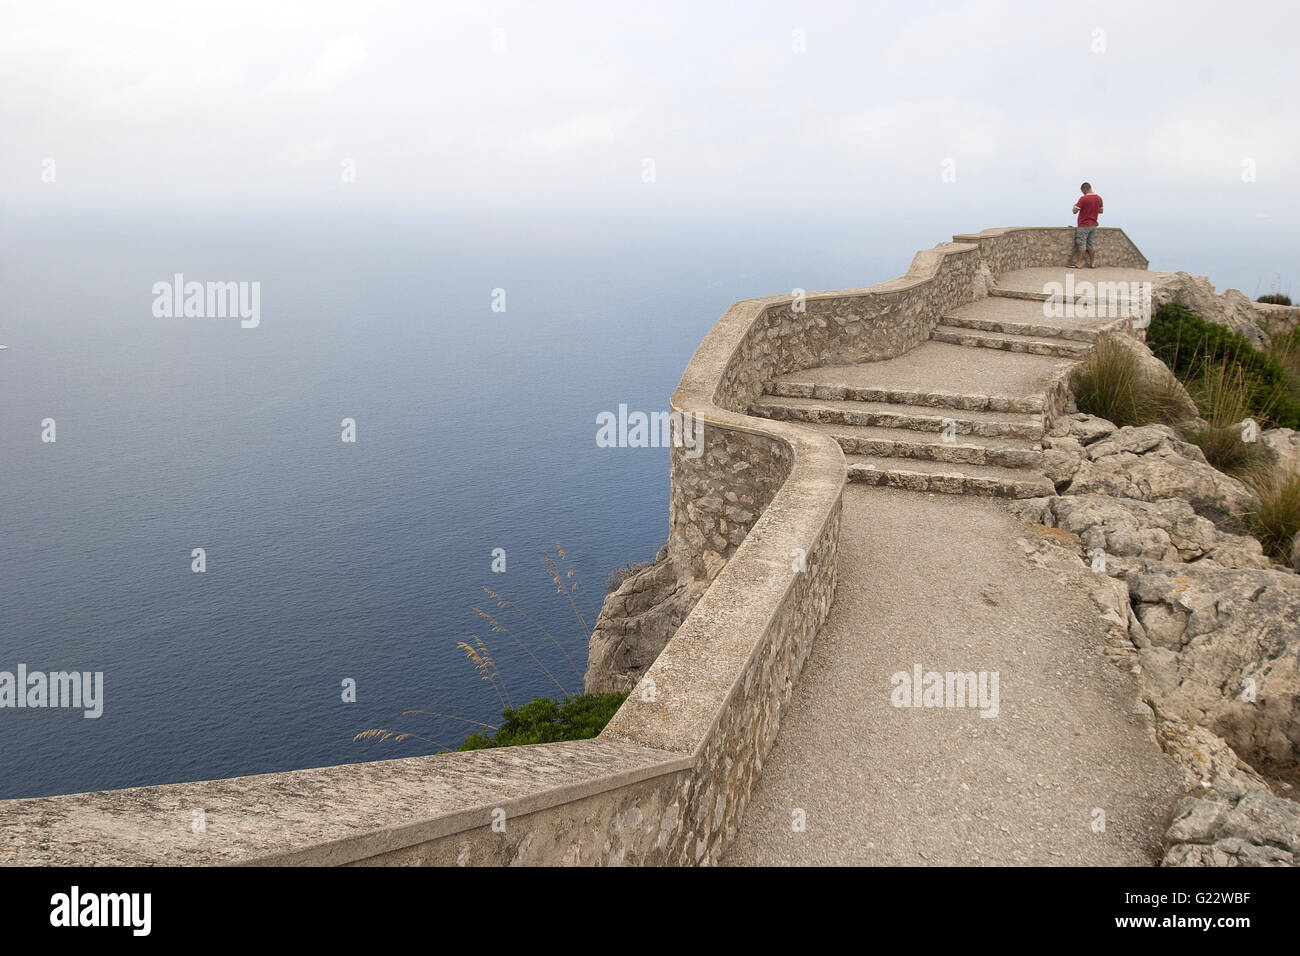 a moody picture of the walk on the cliff of Cap de Formentor with tourists, Palma de Mallorca, Spain, seaside, tourism, holidays Stock Photo